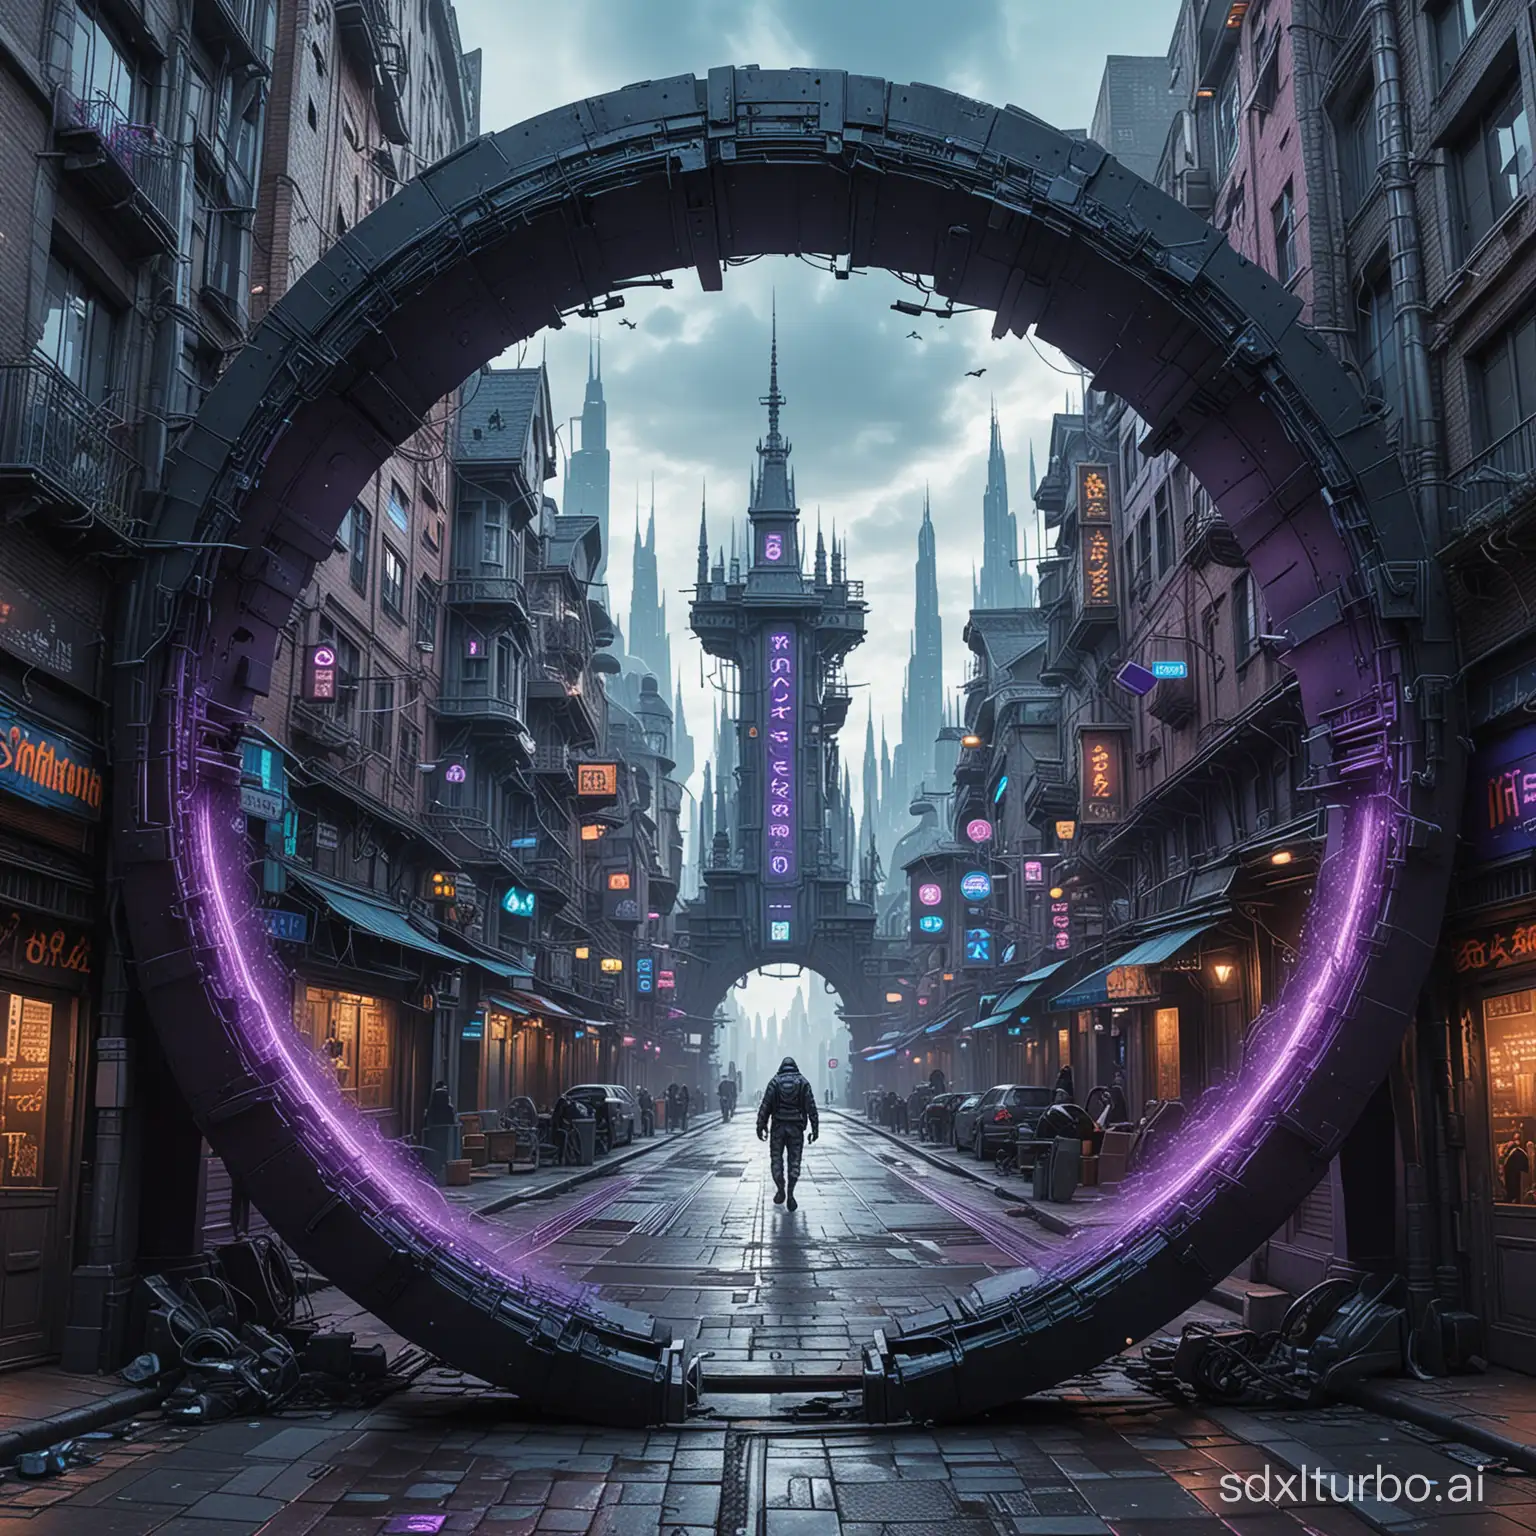 In optical illusion hyper-realistic images, there is a medieval street with a complex glowing giant circular gate in the middle, composed of metal and blue-purple lights, set within a cyberpunk-style city and street, with skyscrapers and flying cars scattered throughout, flying battleships leading to the city of the future, the silhouette of a ninja walking inside, super colorful, super detailed, intricate, cyberpunk style.